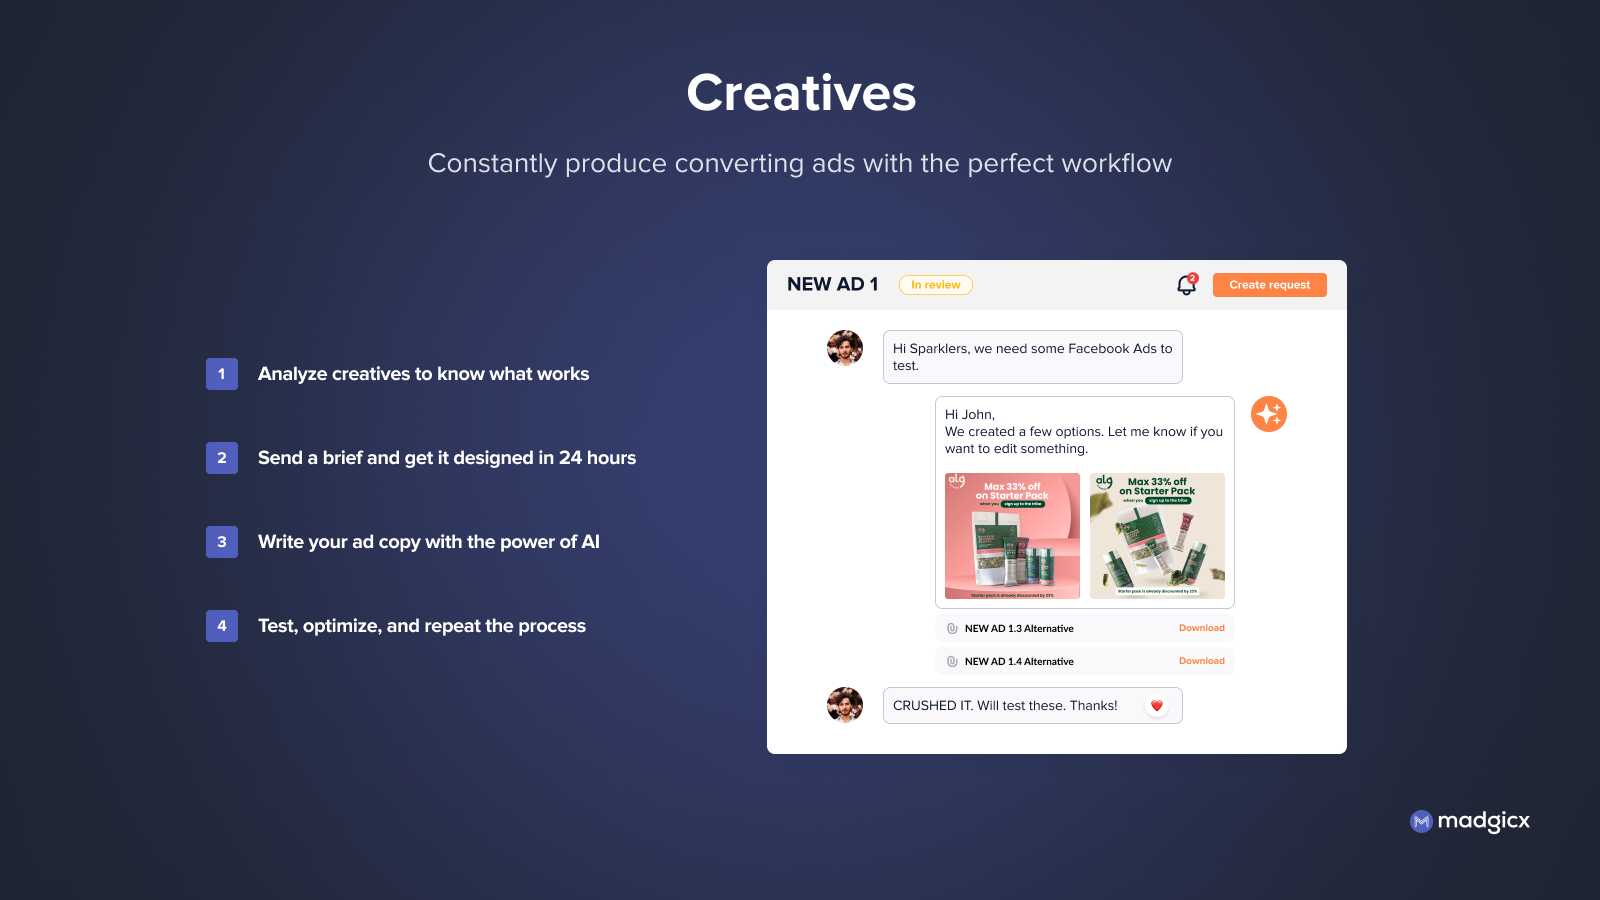 Get all the tools you need to analyze your creatives and produce high-converting ads